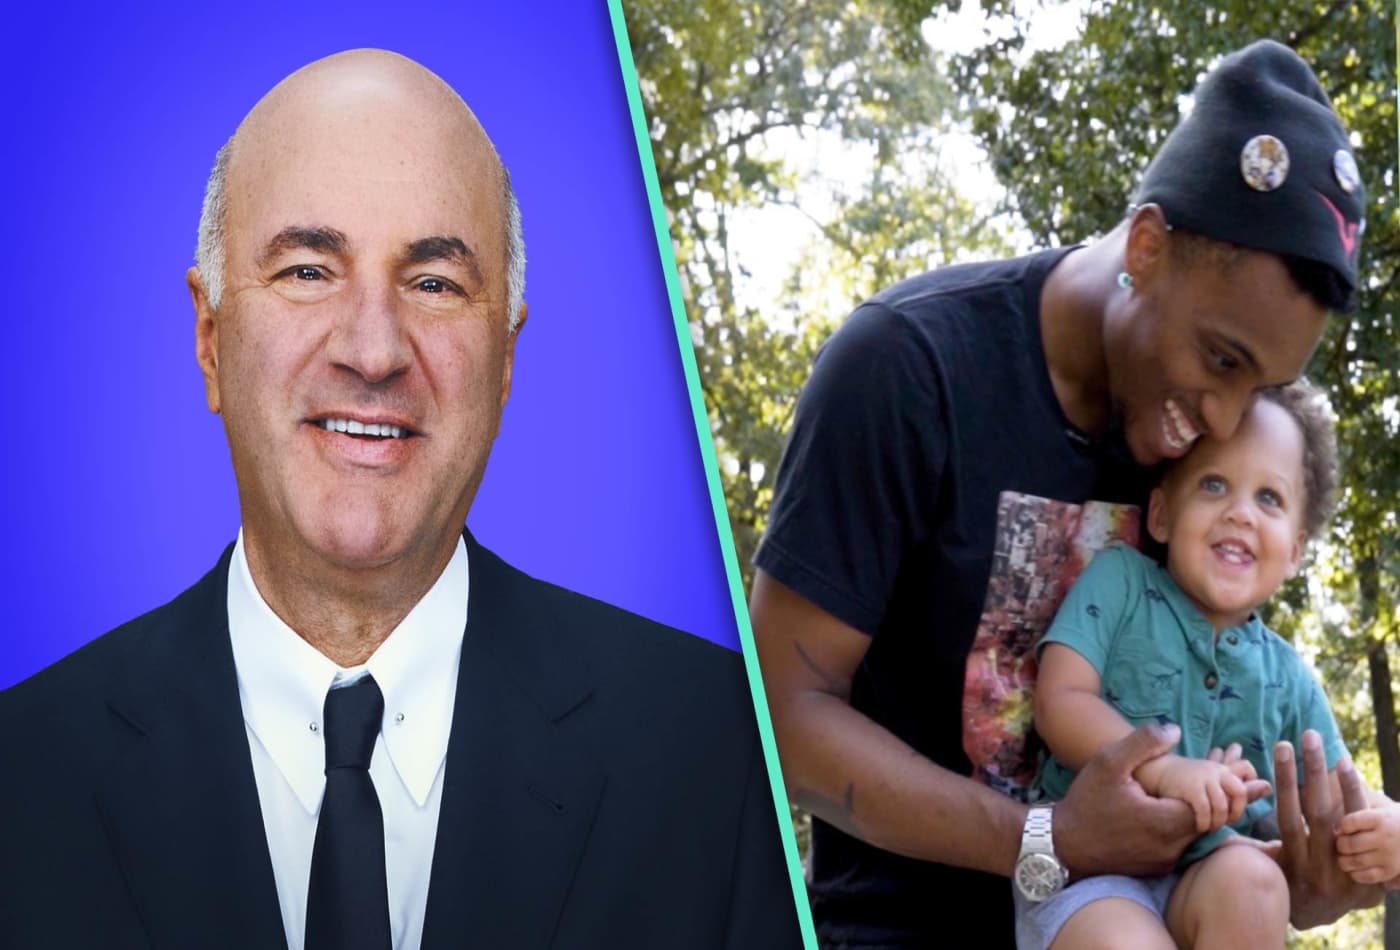 Kevin O'Leary reacts to a 29-year-old USPS worker that made over $90,000 last year: 'He's done a great job in his budget'